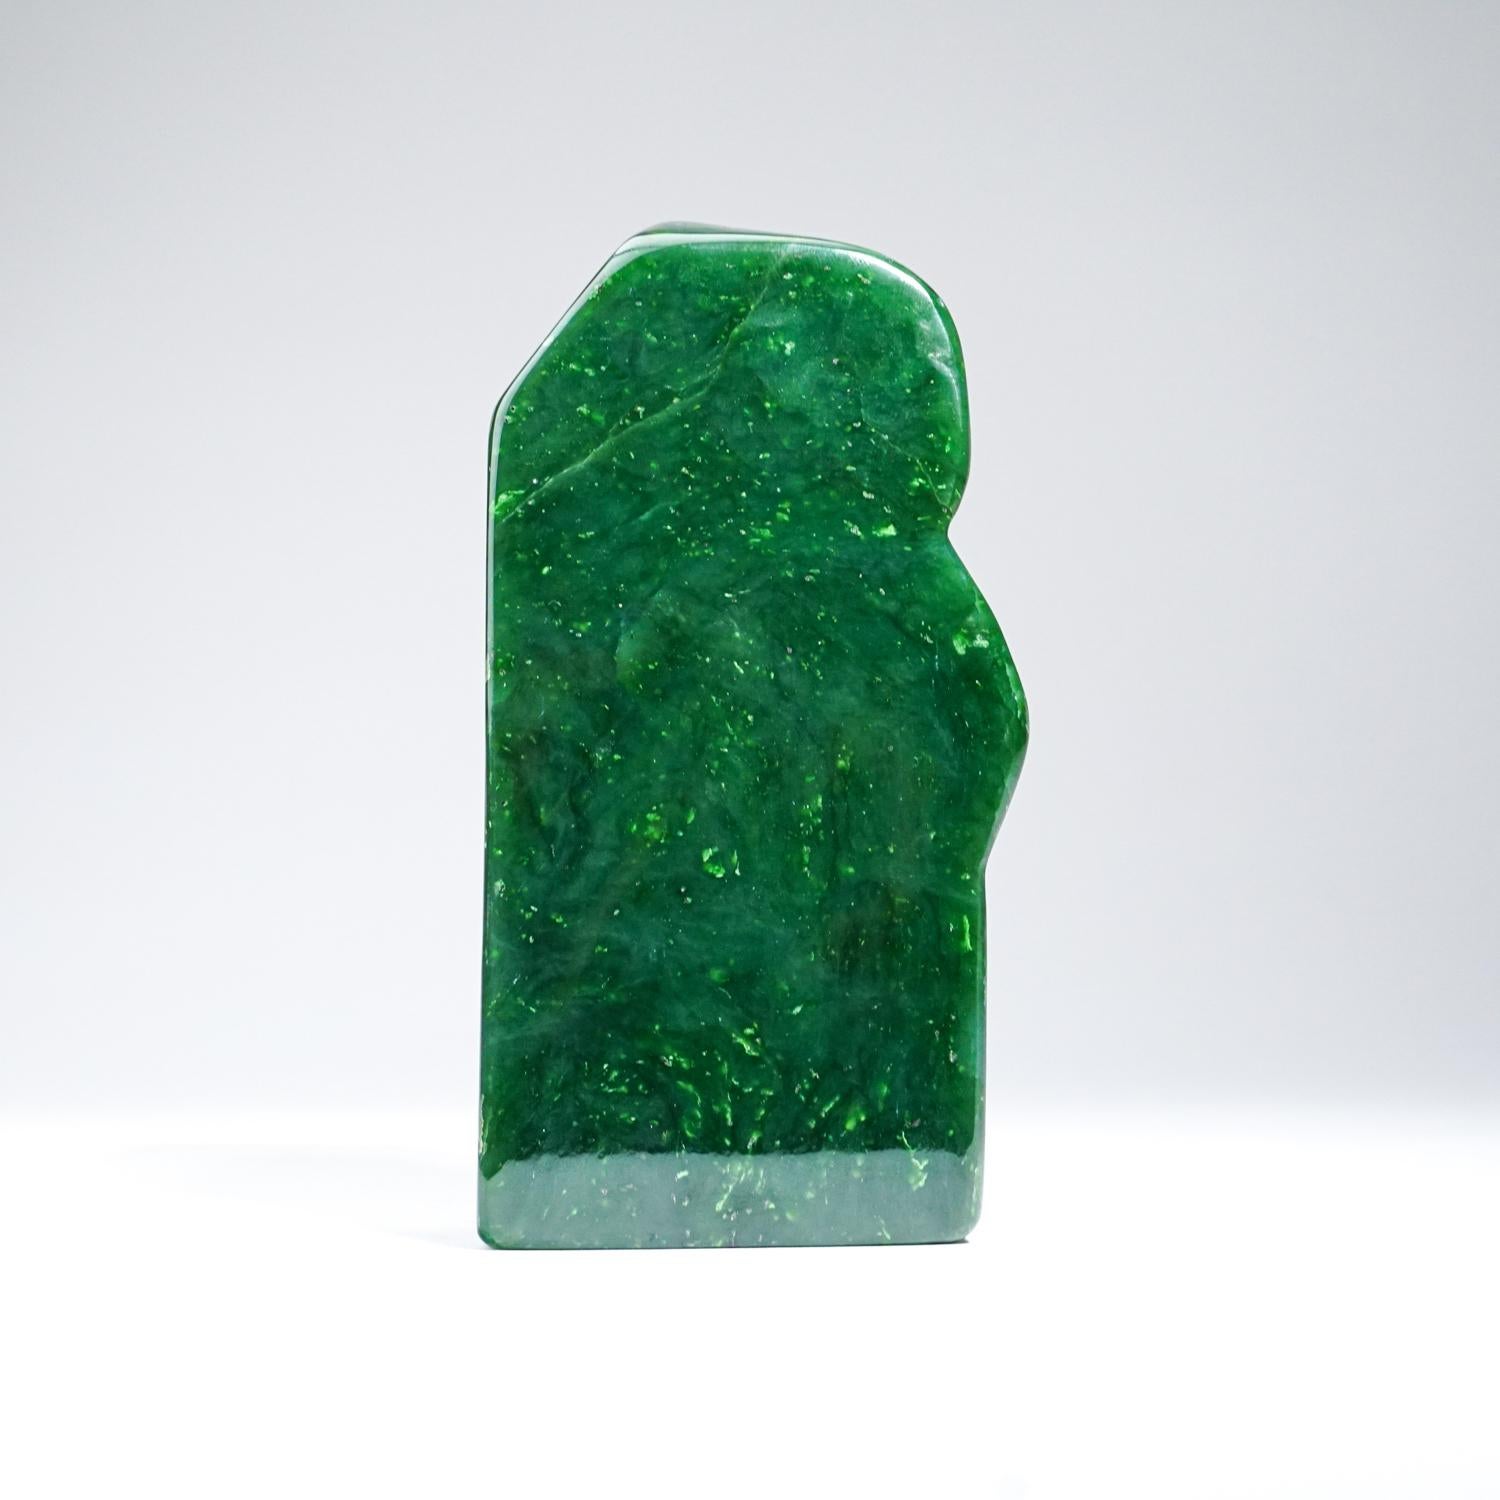 Polished Nephrite Jade Freeform from Pakistan, '4.4 Lbs' In Excellent Condition For Sale In New York, NY